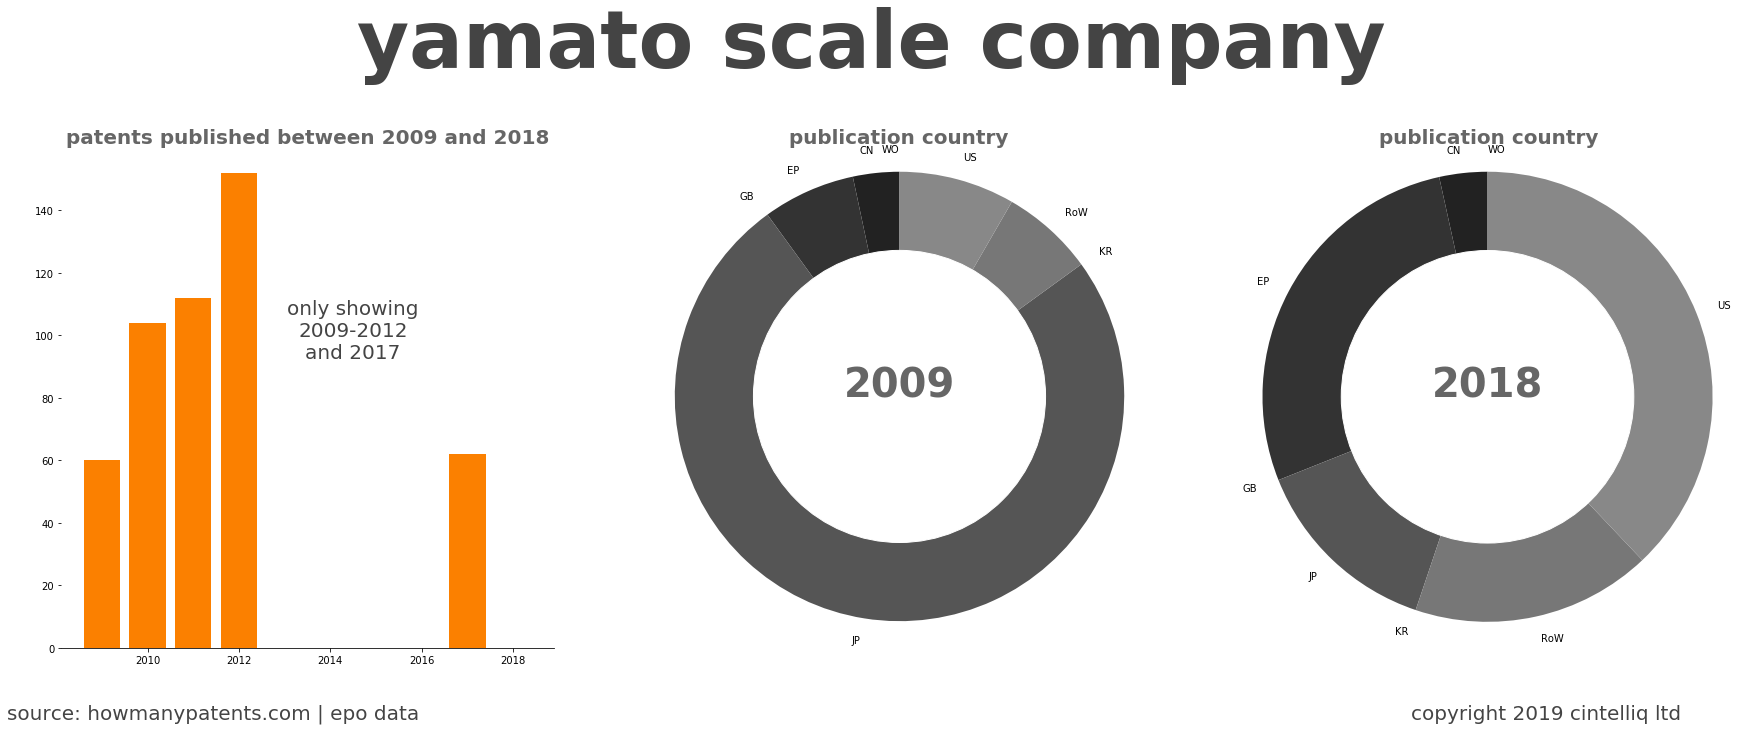 summary of patents for Yamato Scale Company